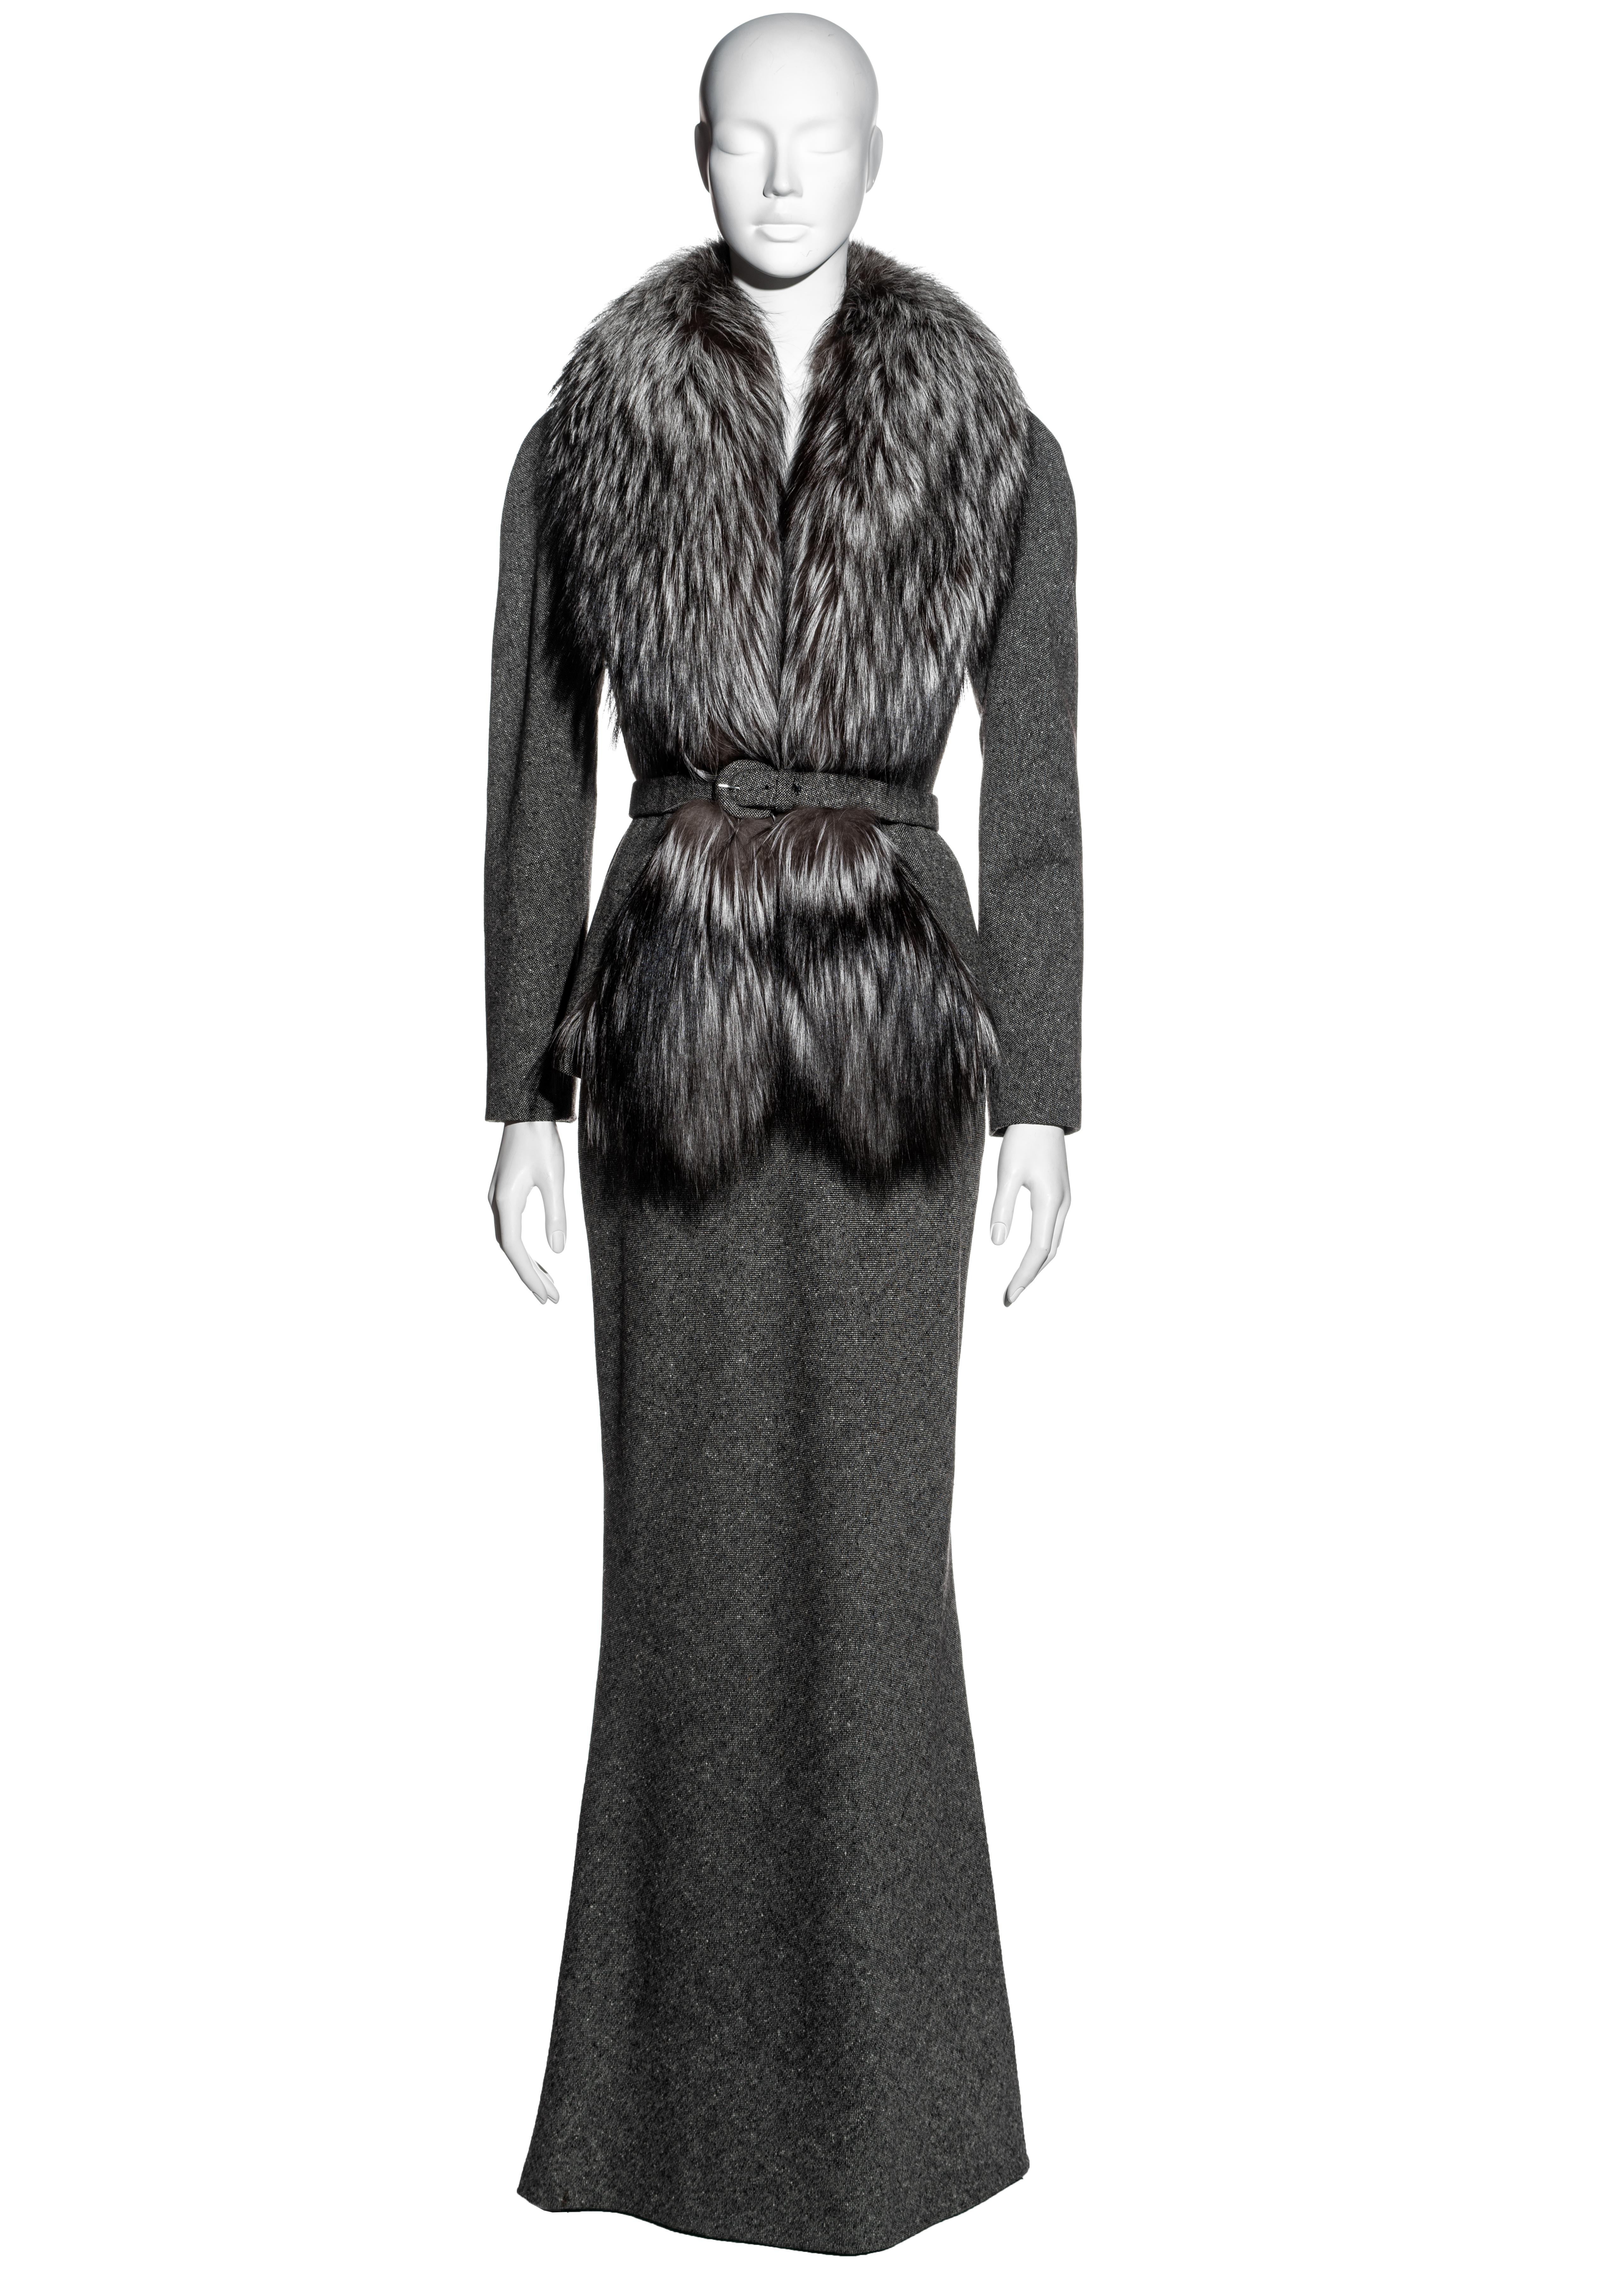 ▪ Christian Dior grey tweed maxi skirt suit 
▪ Designed by John Galliano
▪ 100% Wool
▪ Large fox fur collar 
▪ Matching tweed waist belt 
▪ Fishtail maxi skirt 
▪ Cream silk lining with embroidered 'CD'
▪ FR 40 - UK 12 - US 8
▪ Fall-Winter 1998
